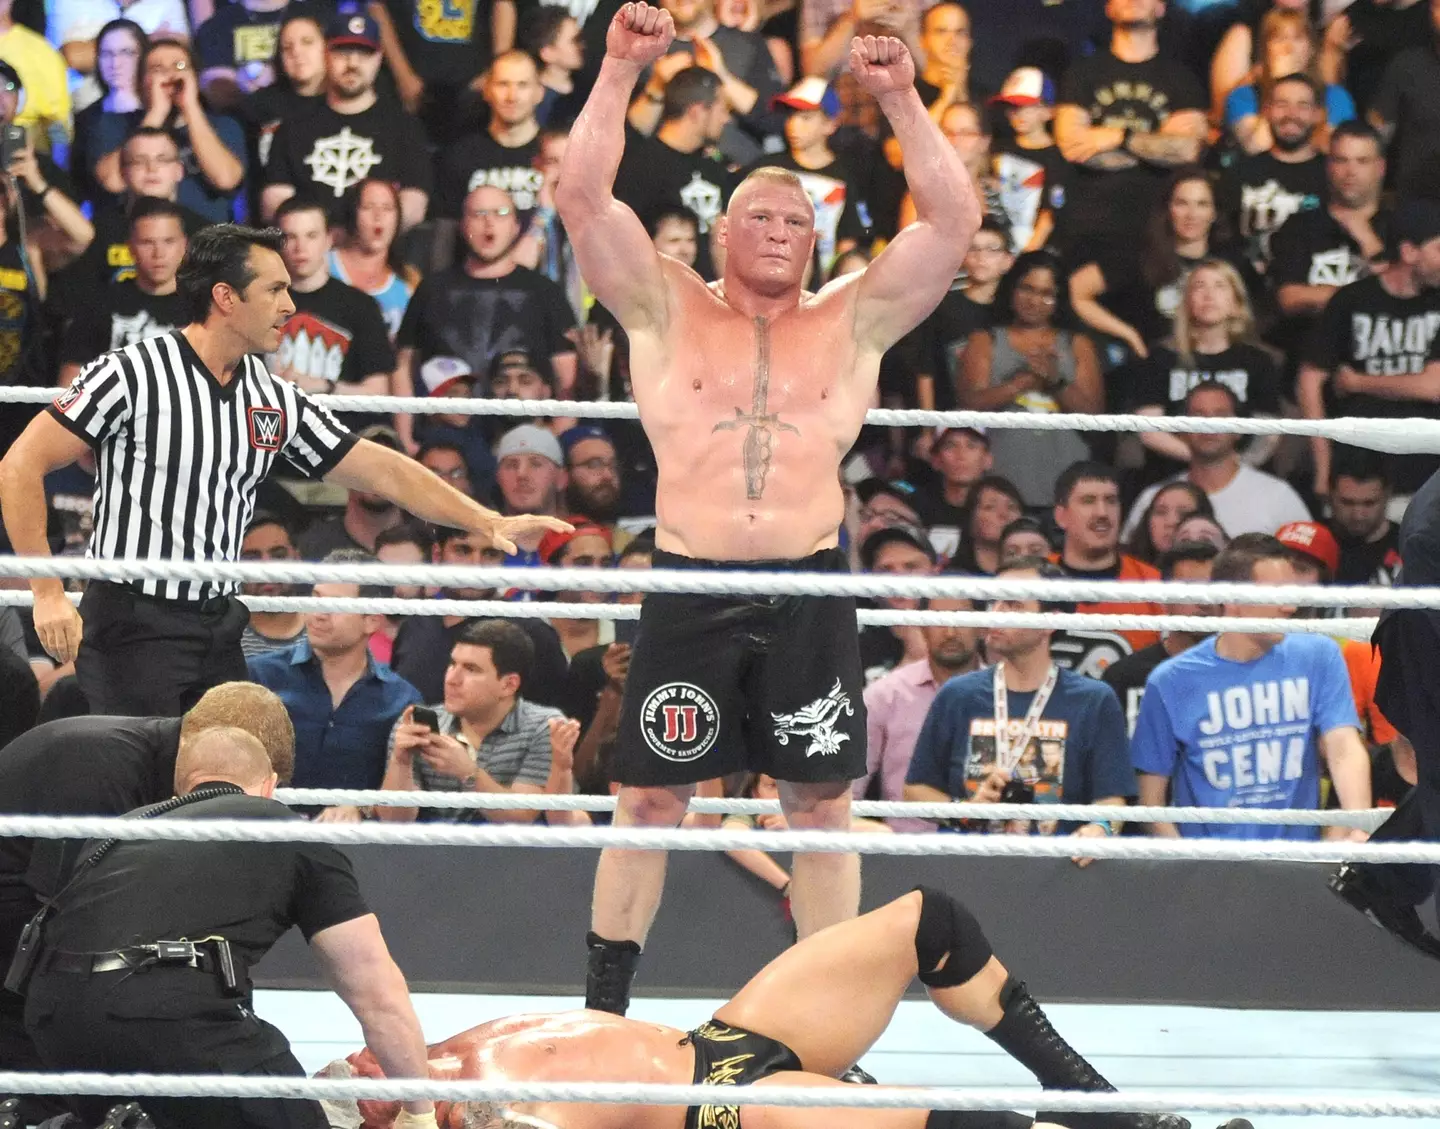 Much has changed in the 20 years since Lesnar joined WWE but he's still a beast. Image: PA Images